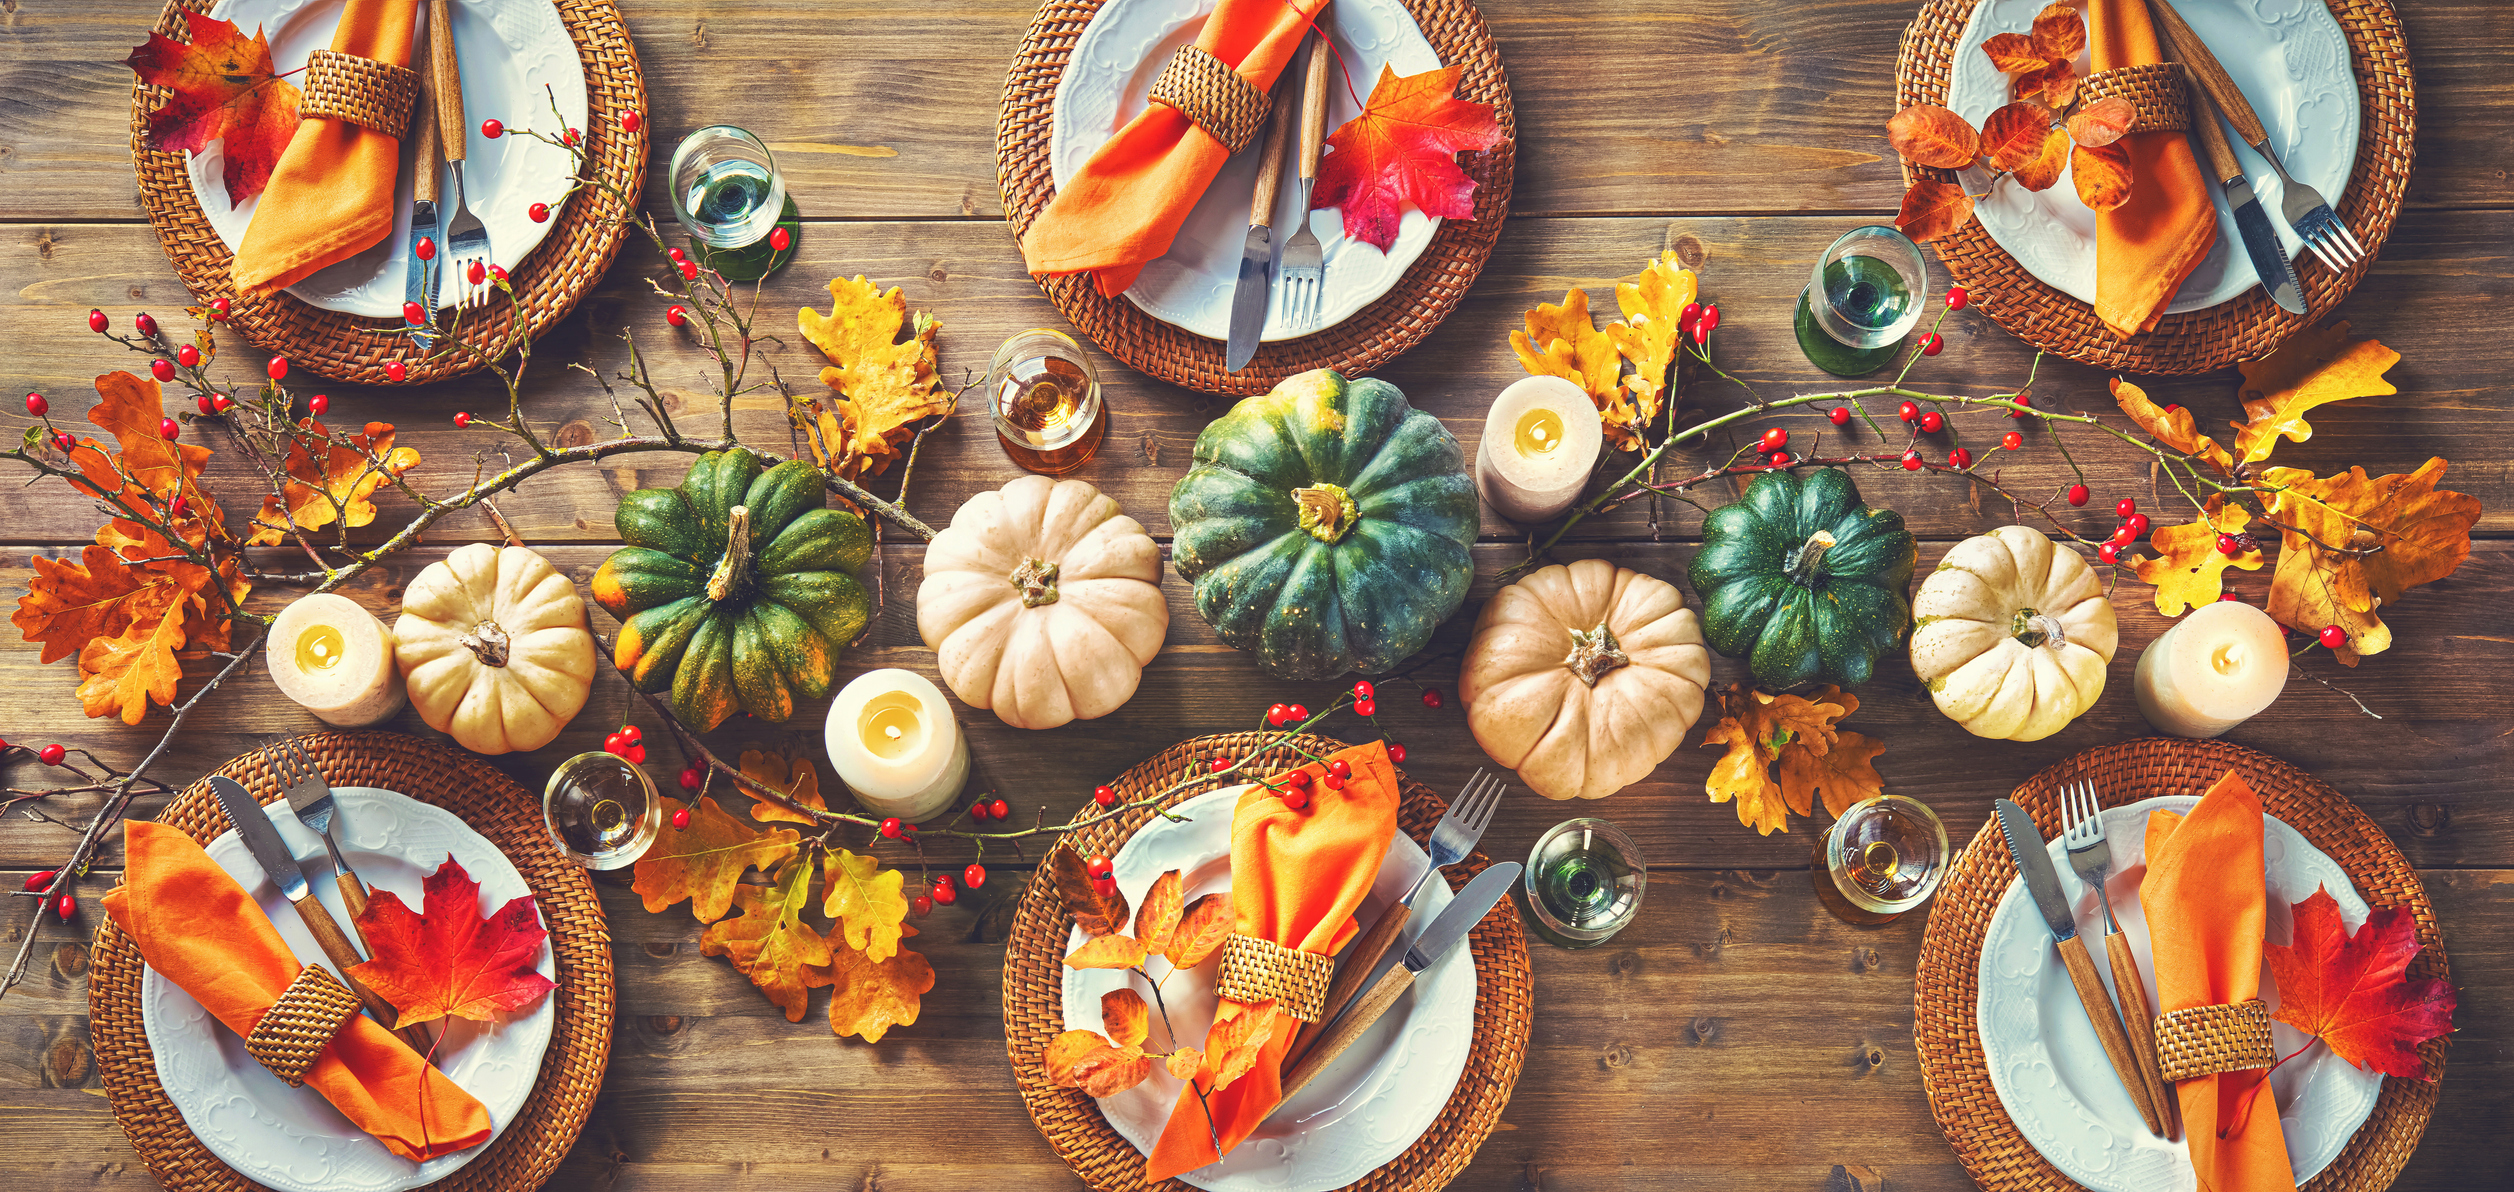 Autumnal decorated table for celebrating Thanksgiving or other family celebration. Festive table setting with plates, glassware, pumpkins, rose hip branches and leaves on wooden table background, top view